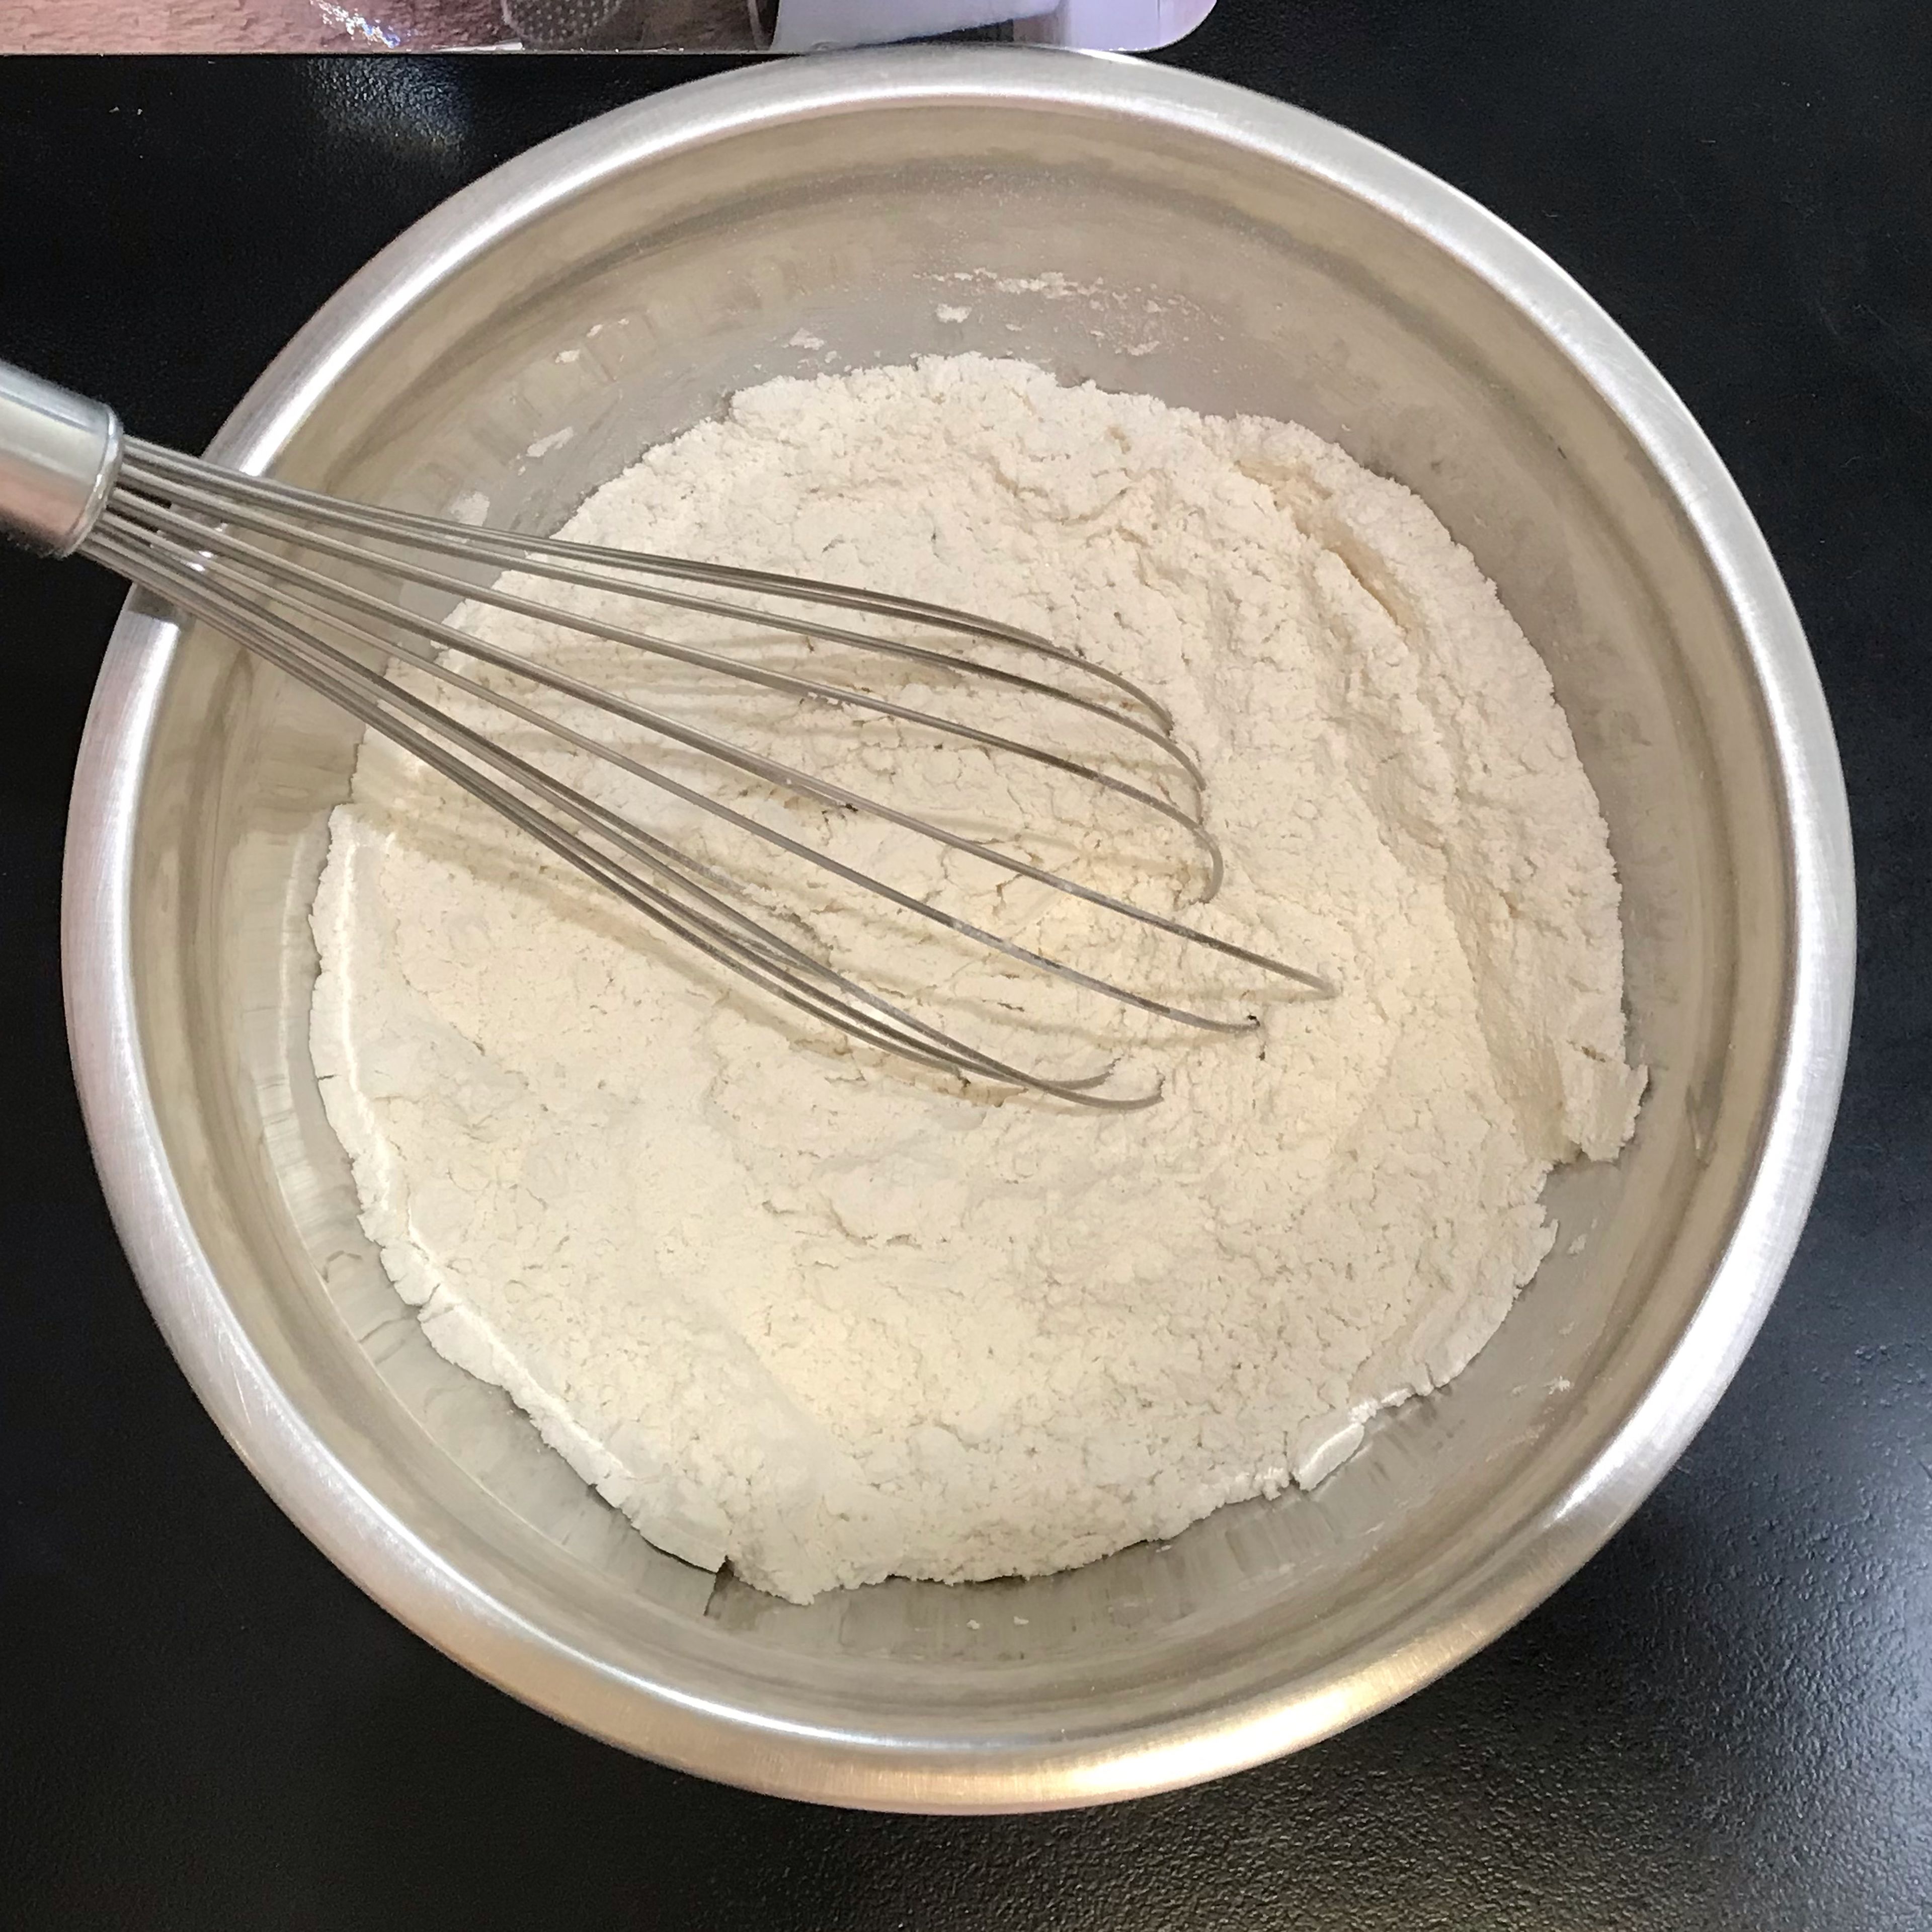 In a separate medium bowl, whisk together the flour, baking powder, baking soda and salt.